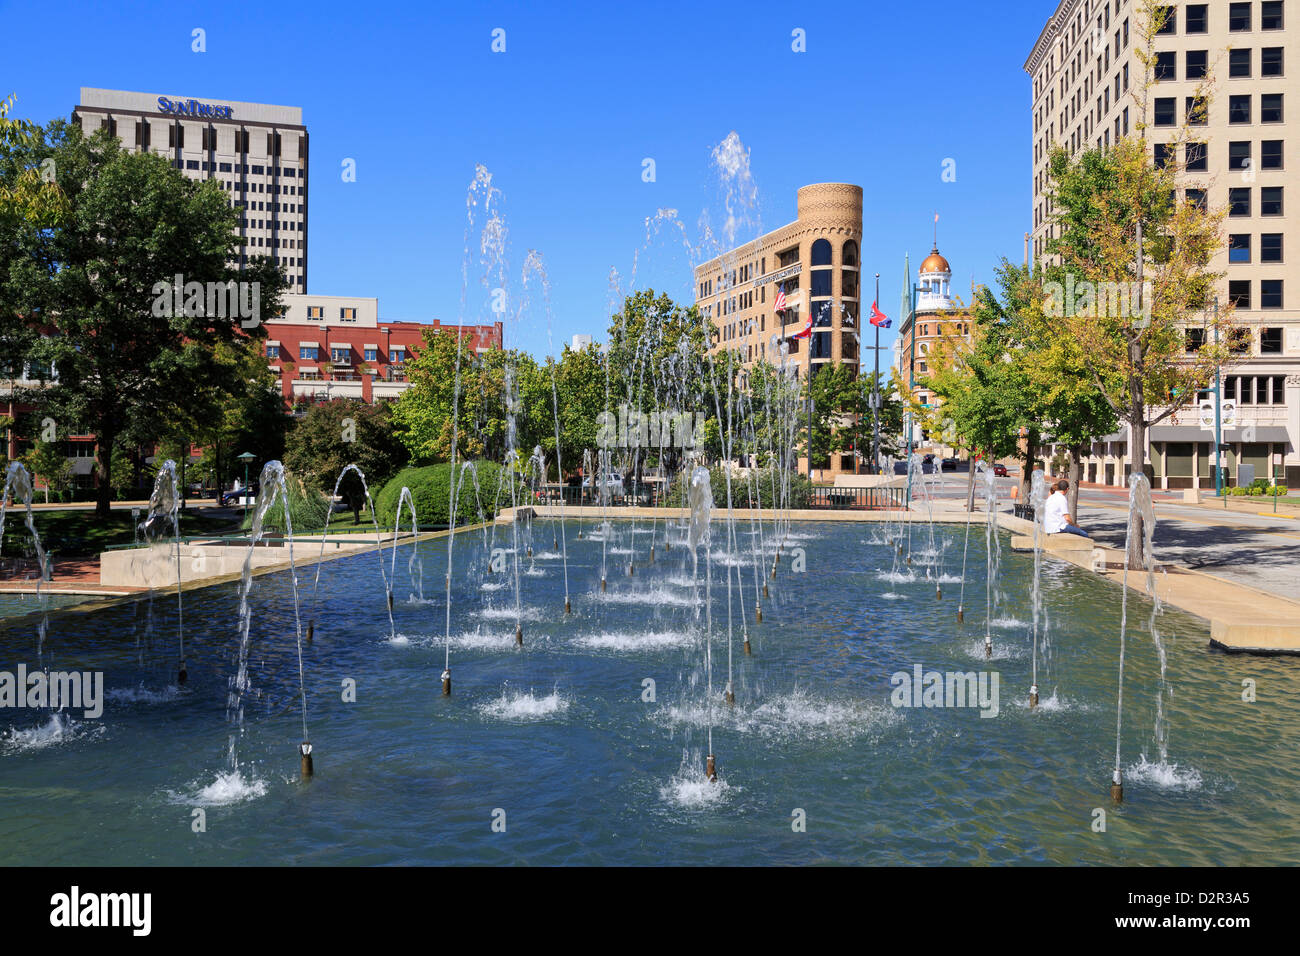 Fountain in Miller Park, Chattanooga, Tennessee, United States of America, North America Stock Photo